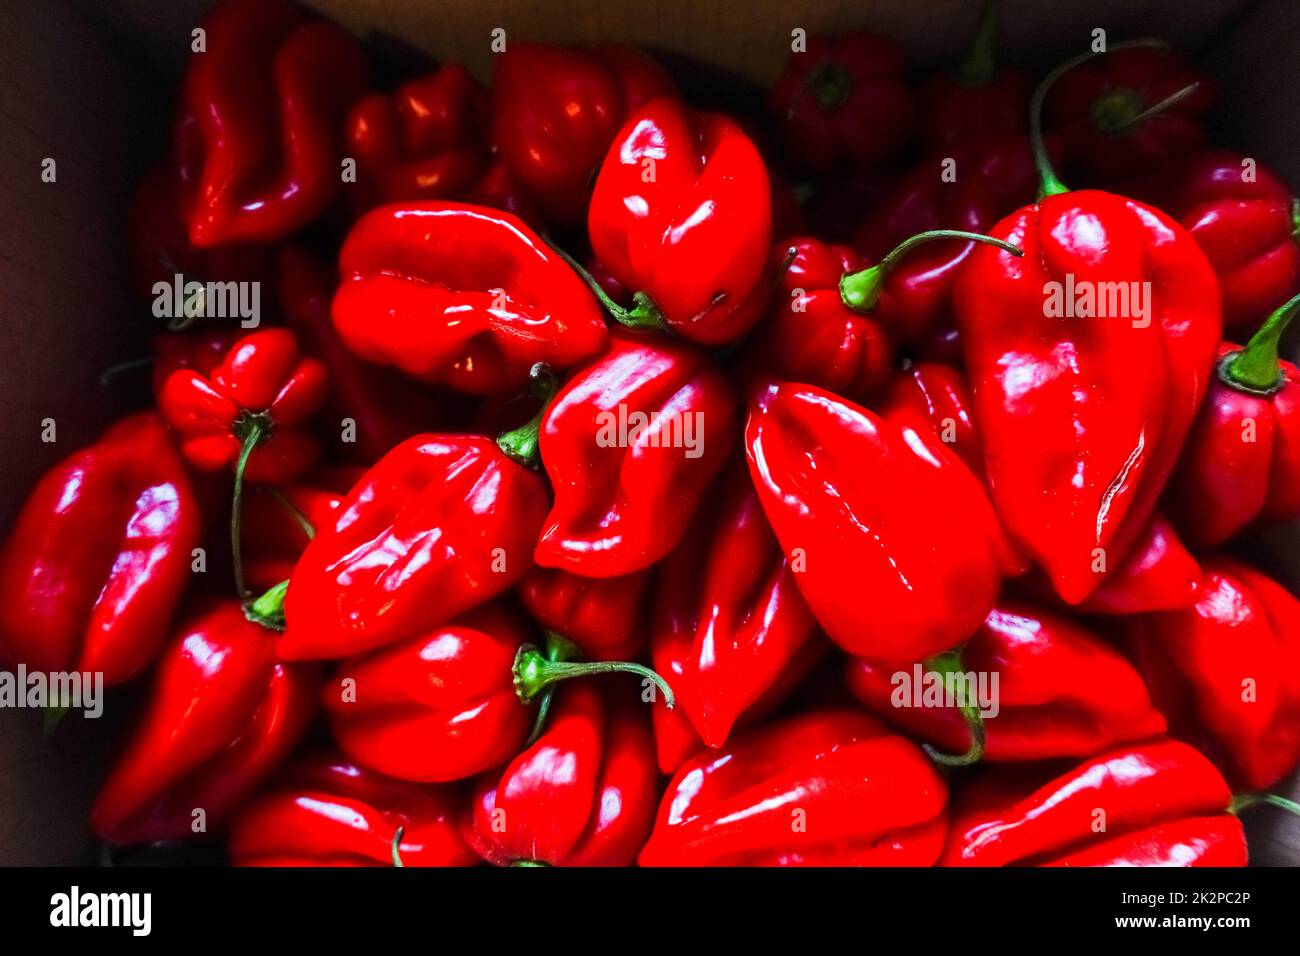 lot of red spicy habanero for a spicy meal Stock Photo